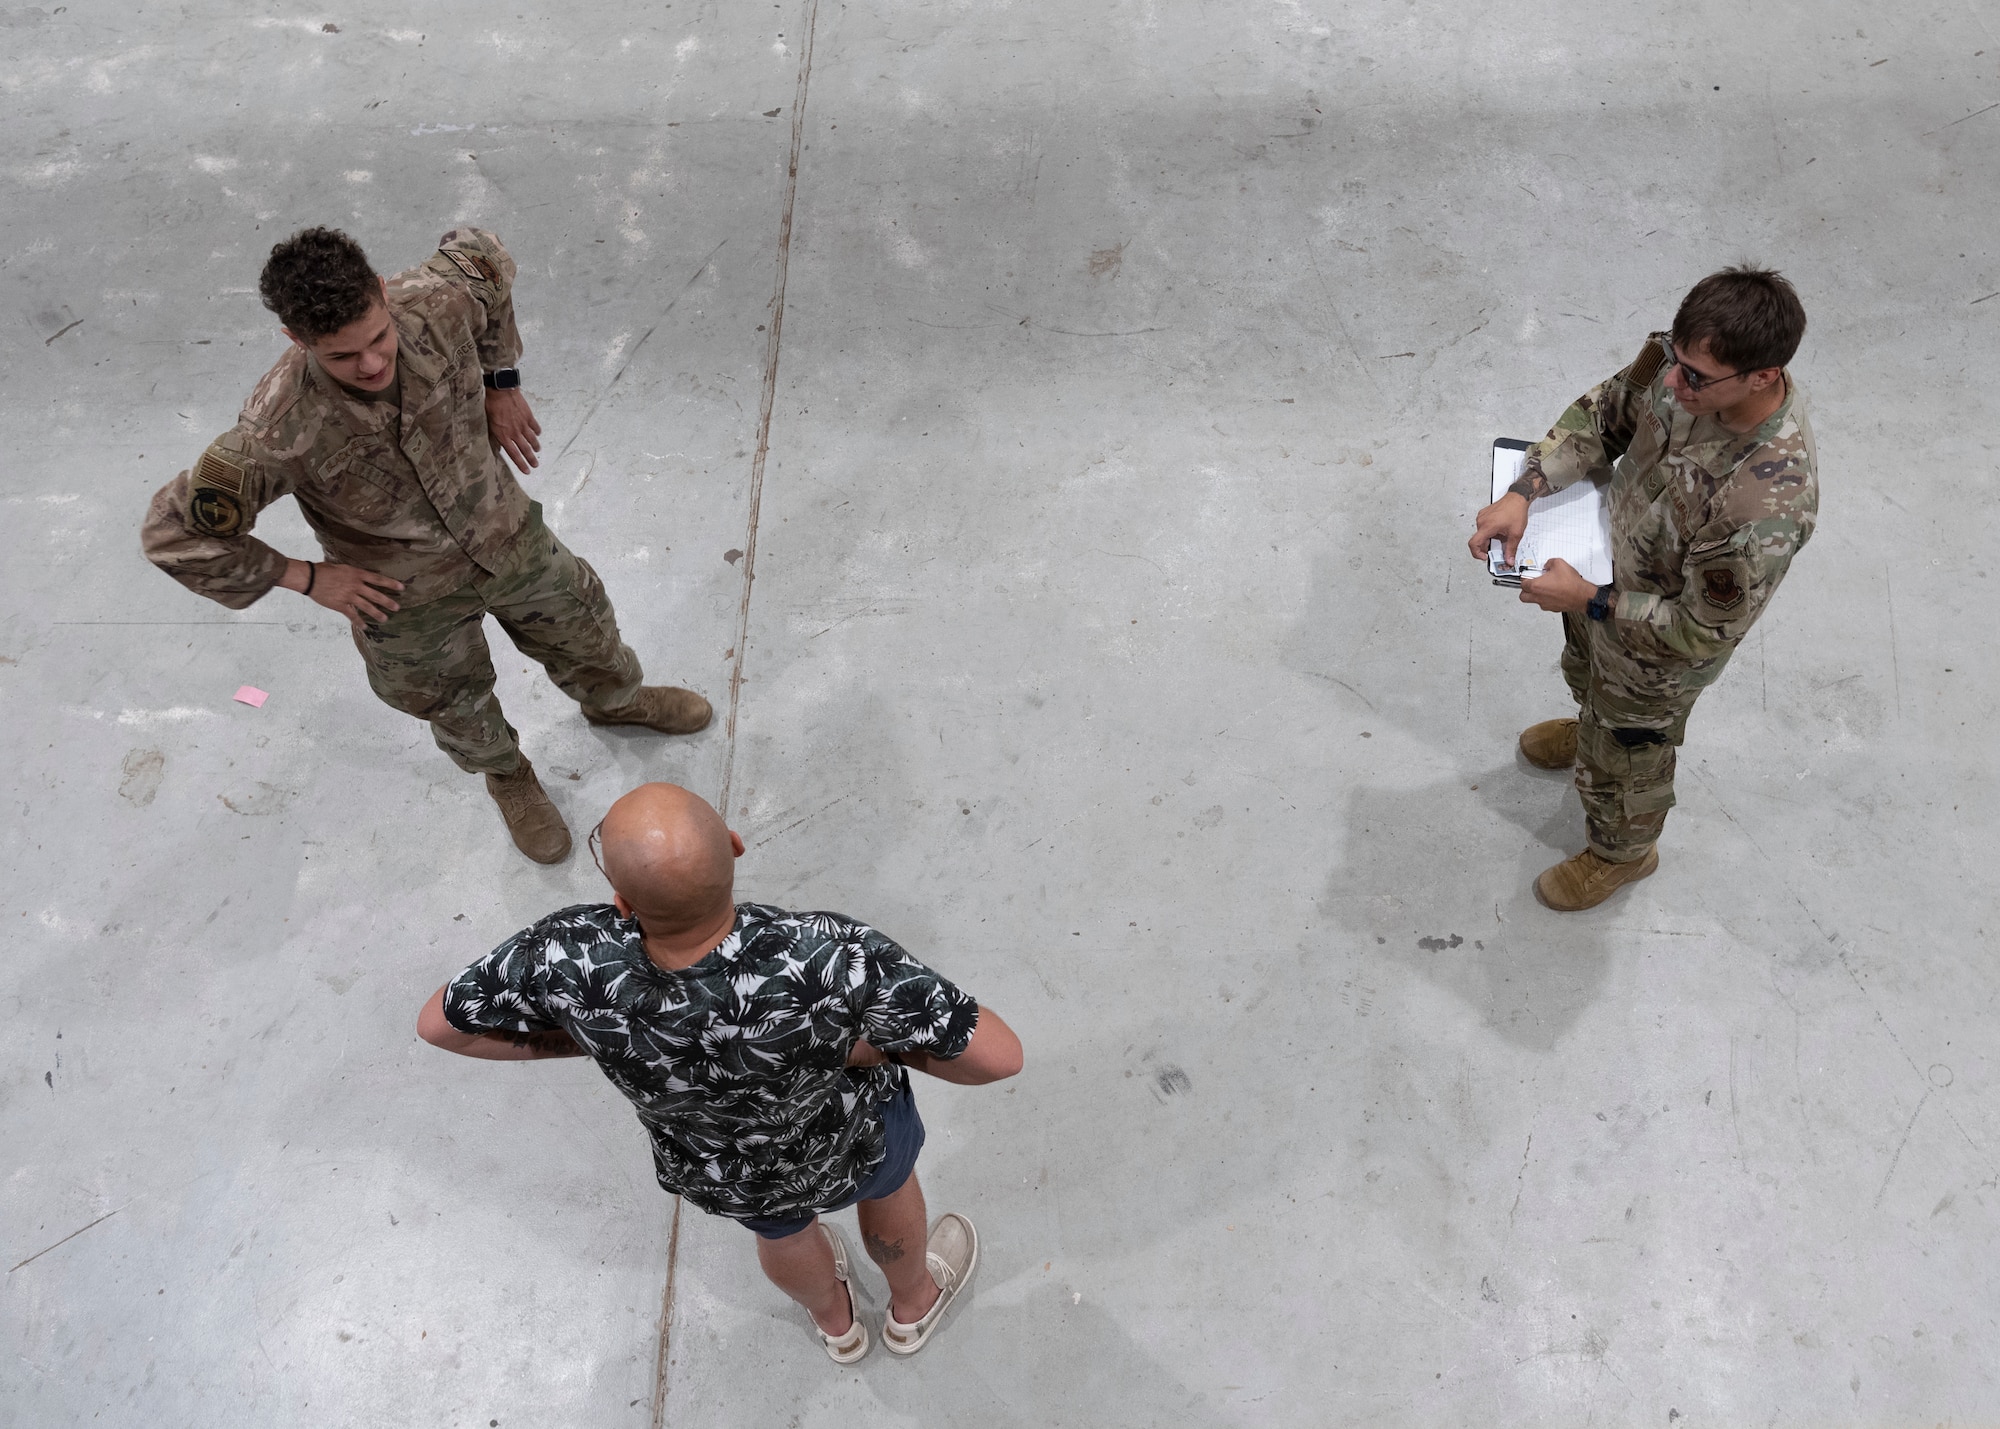 Two Airmen administer a sobriety test to a third person.